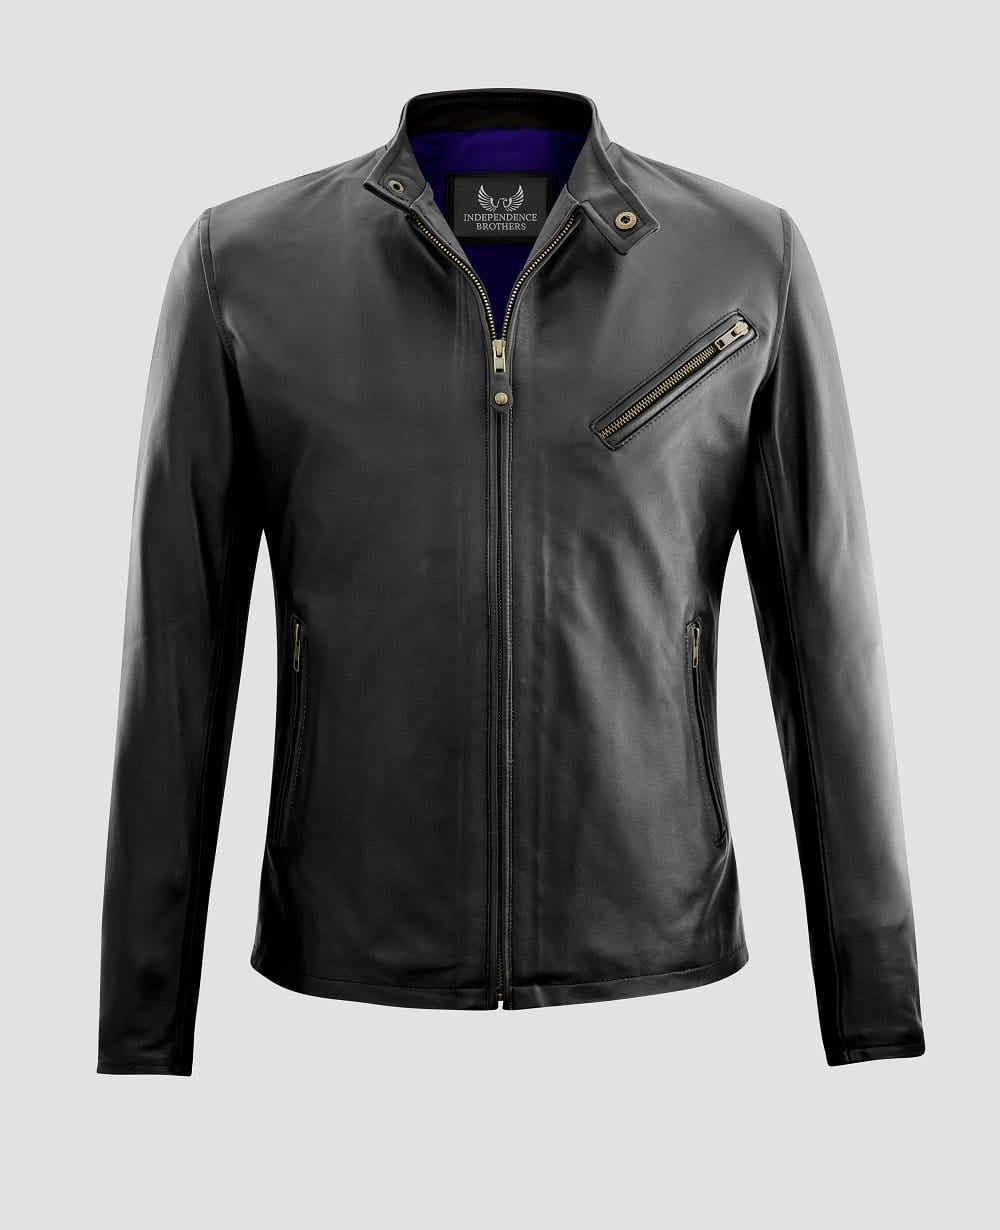 Size guide for leather jackets